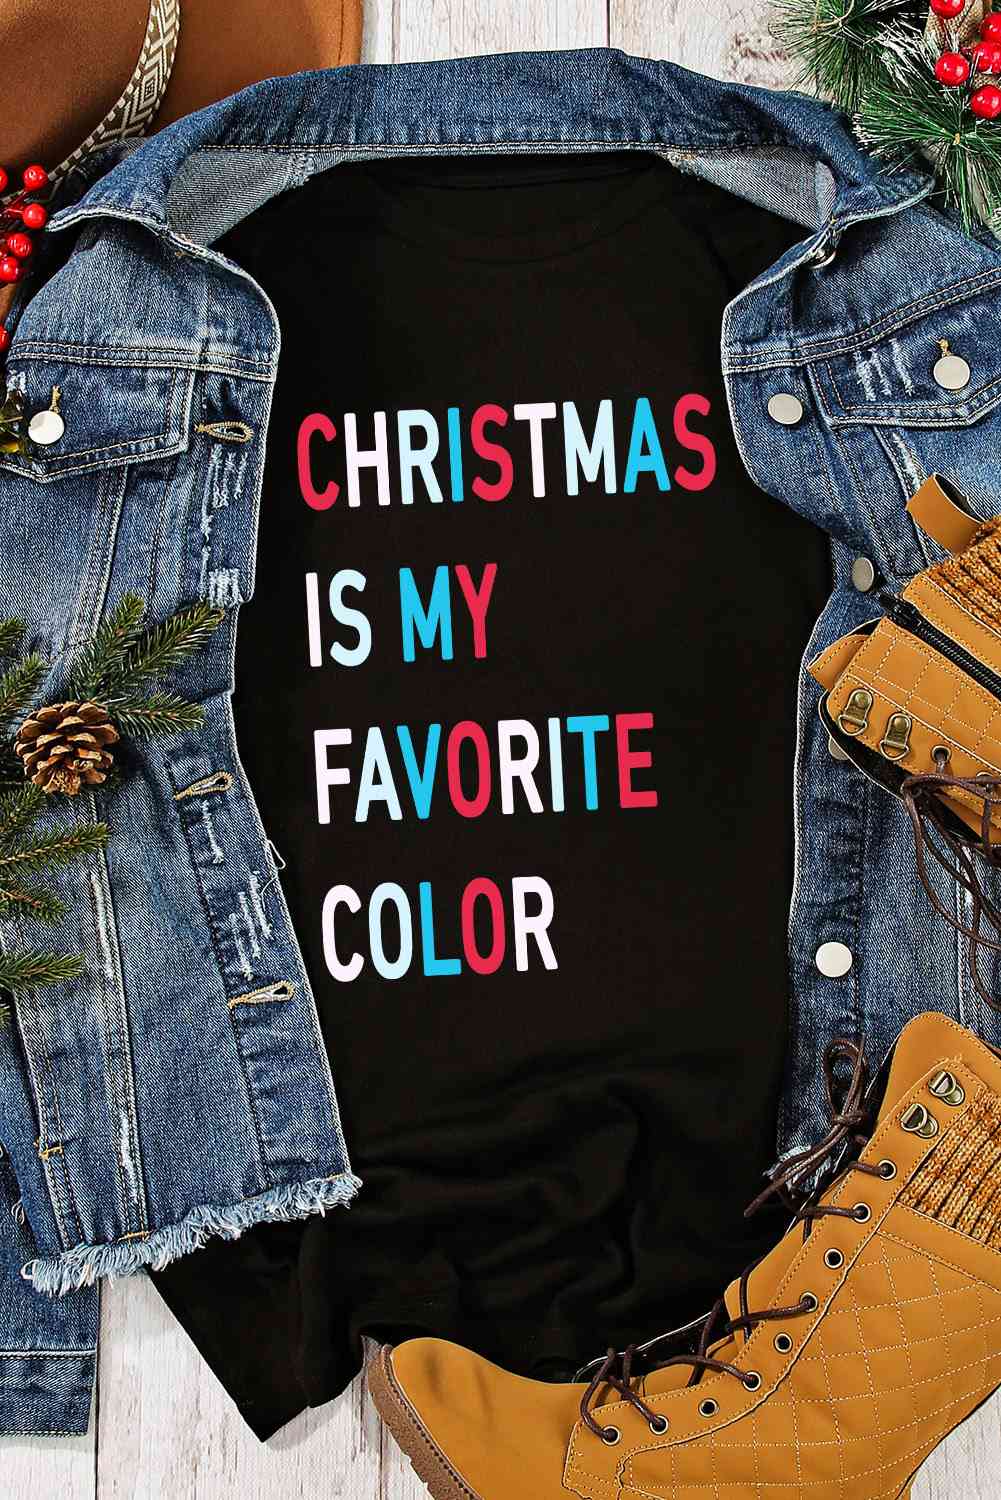 CHRISTMAS IS MY FAVORITE COLOR グラフィック T シャツ